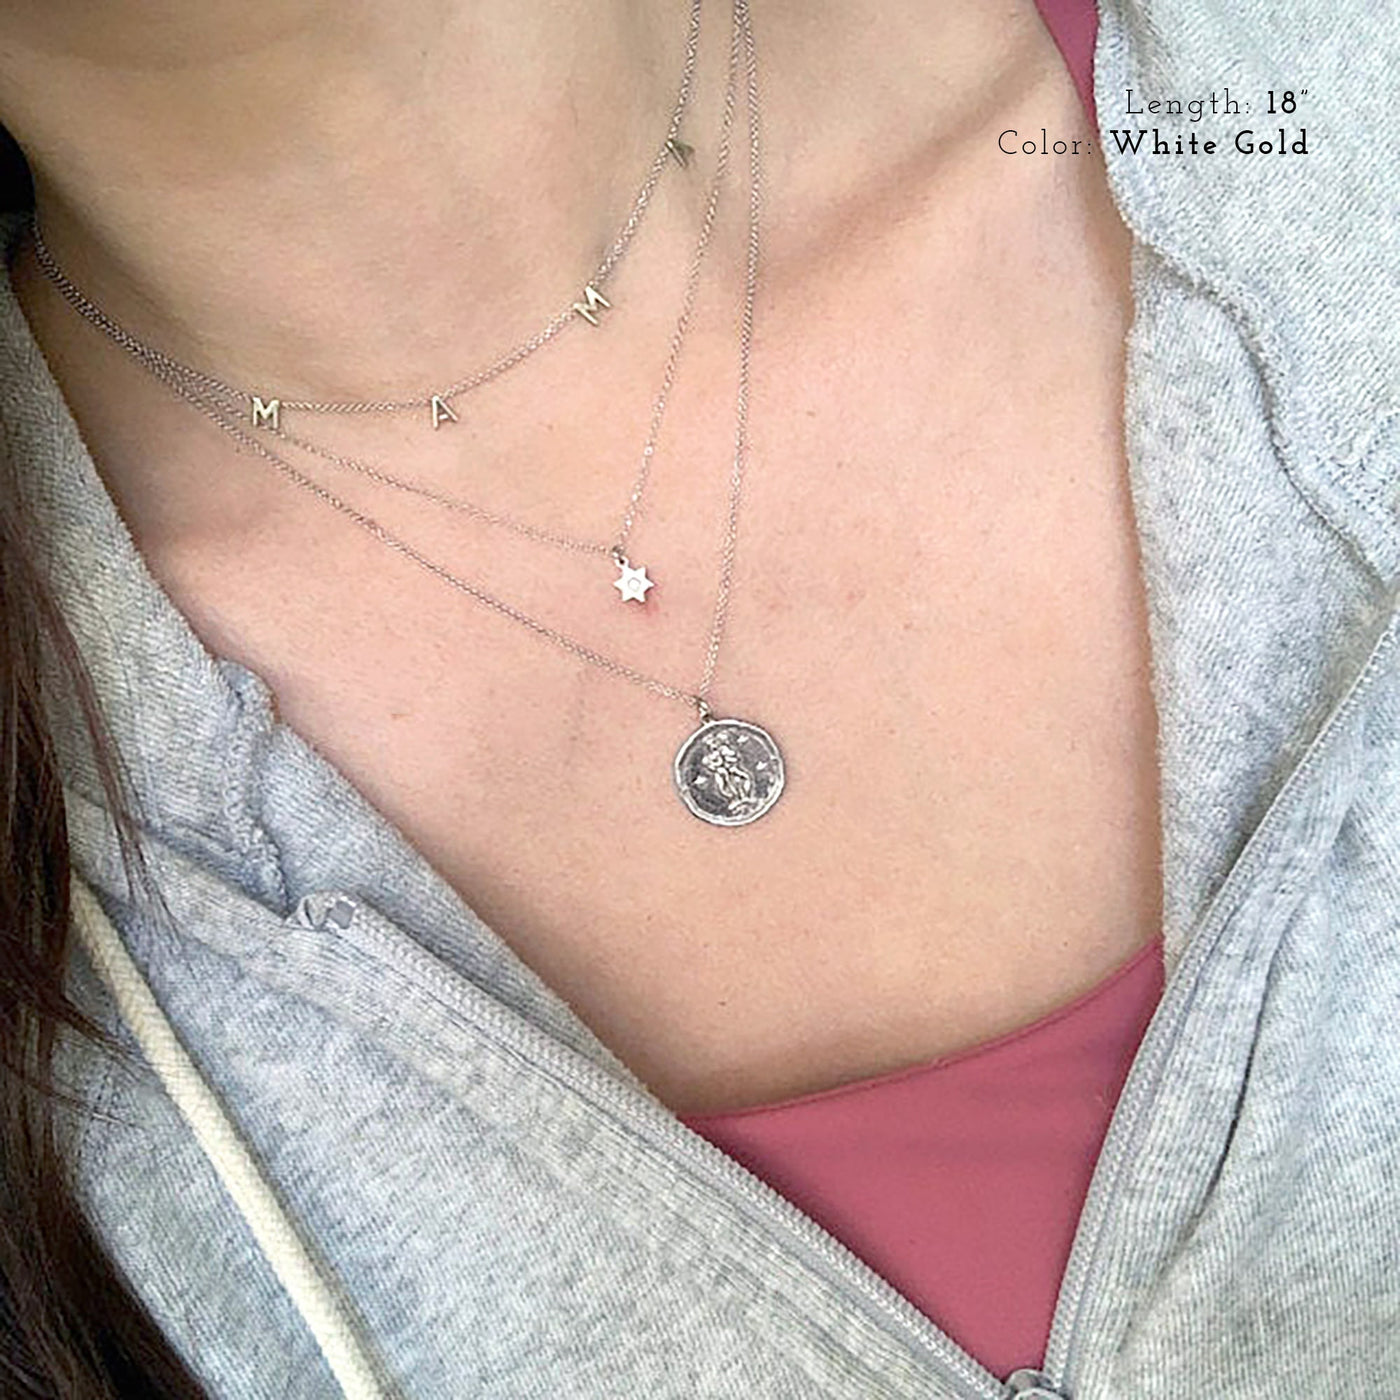 Miraculous Medal Toggle Necklace | Toggle necklace, Necklace, Shell charm  necklace